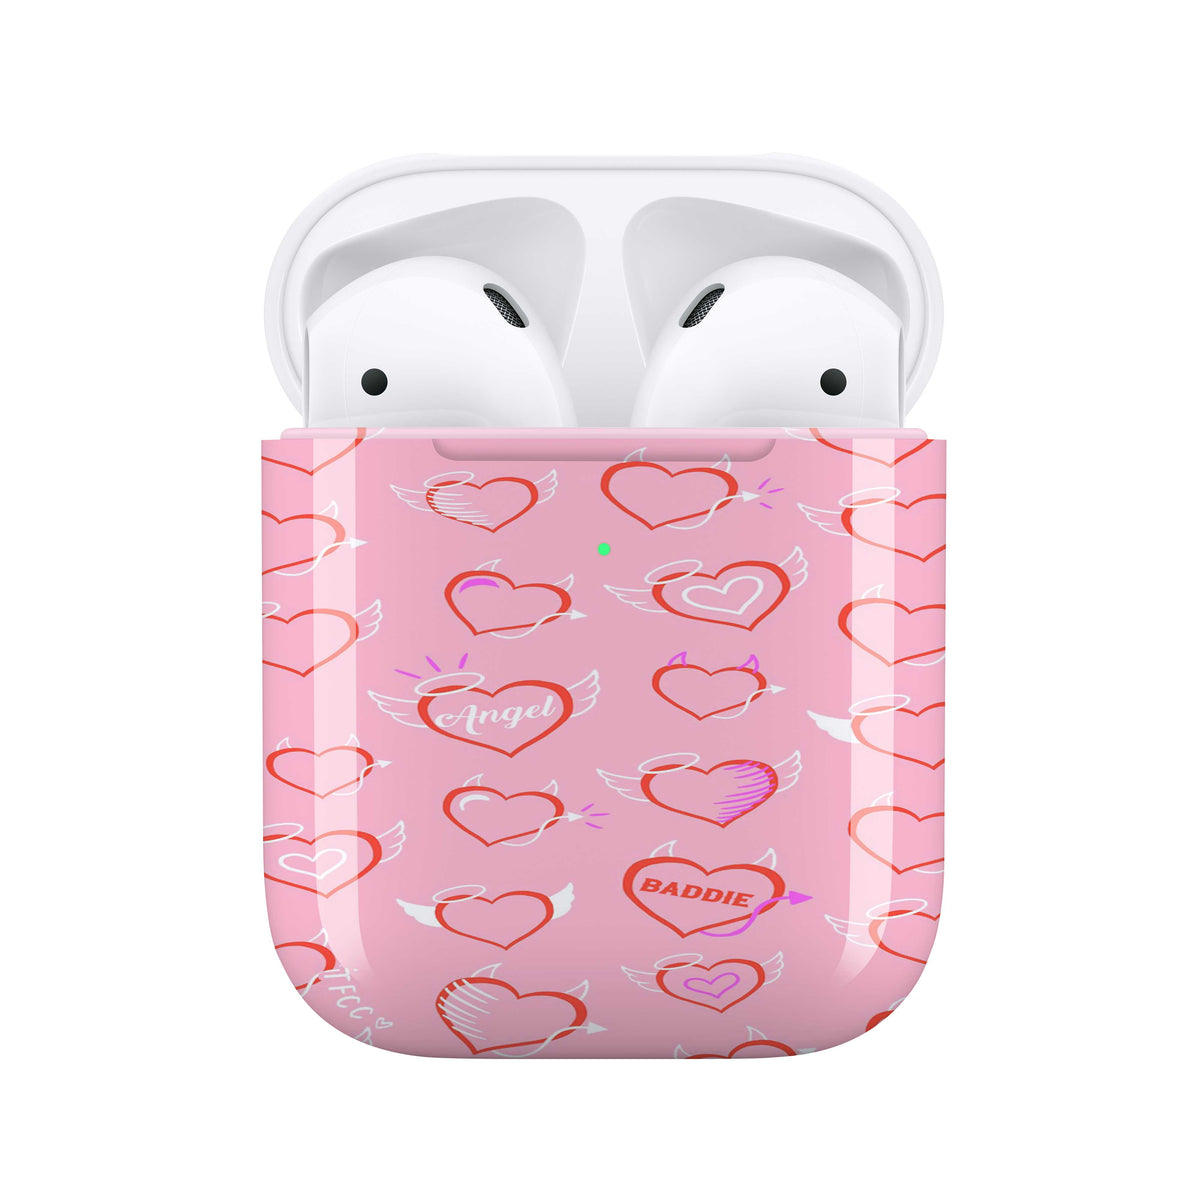 Heartbreaker AirPods Case - thefonecasecompany